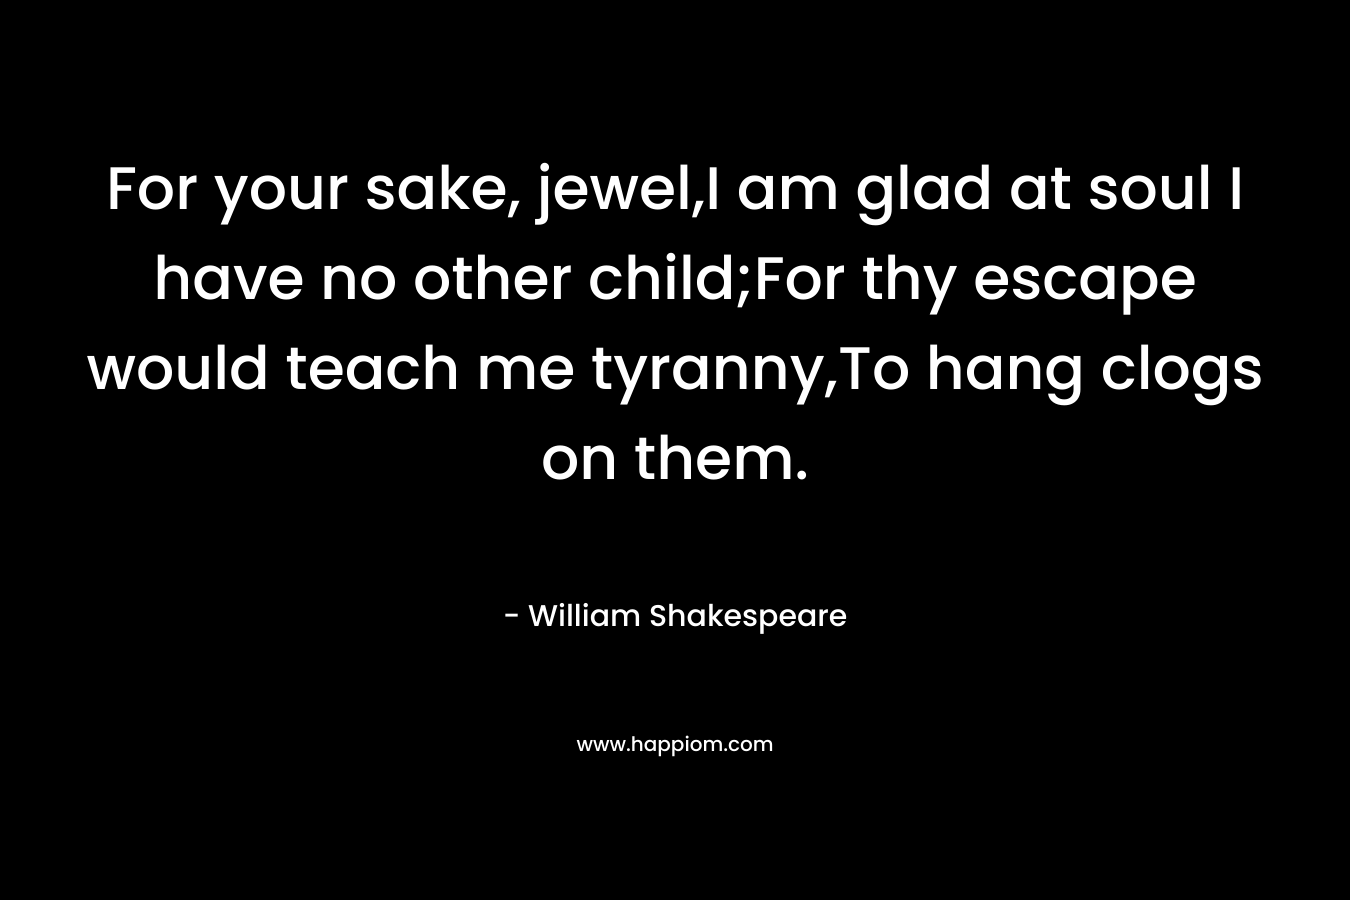 For your sake, jewel,I am glad at soul I have no other child;For thy escape would teach me tyranny,To hang clogs on them.